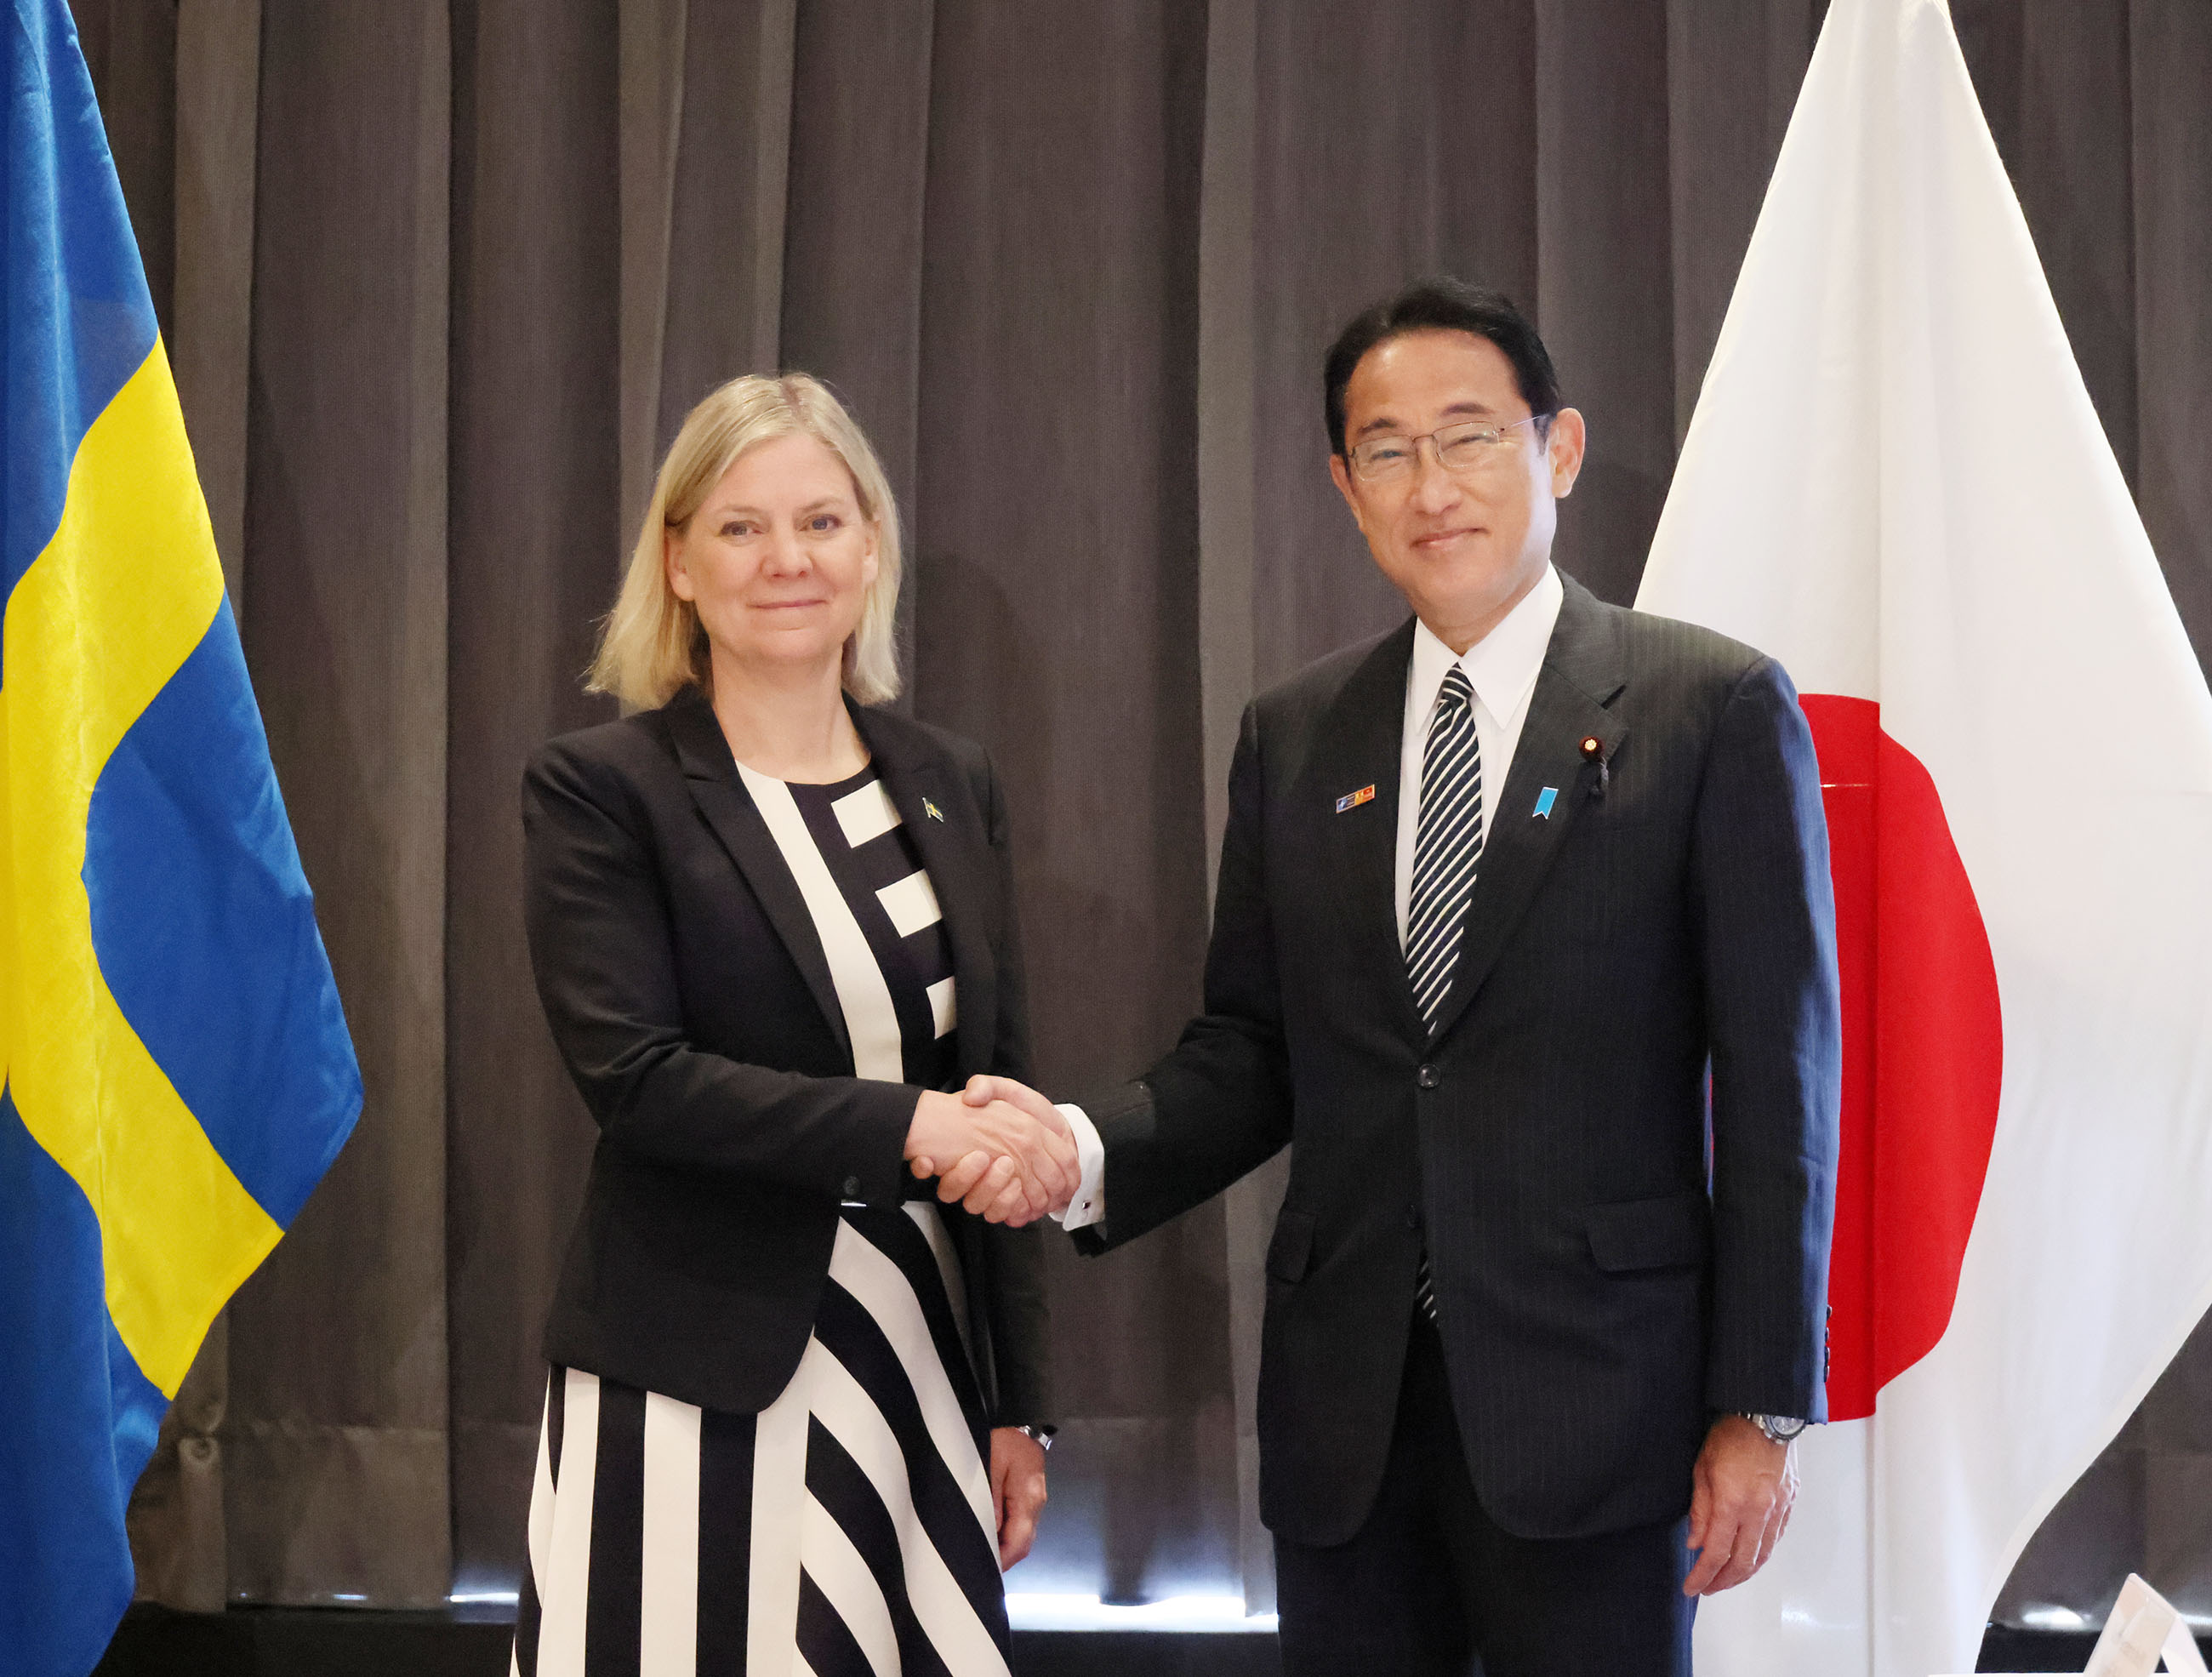 Prime Minister Kishida holding a meeting with Swedish Prime Minister Andersson (2)